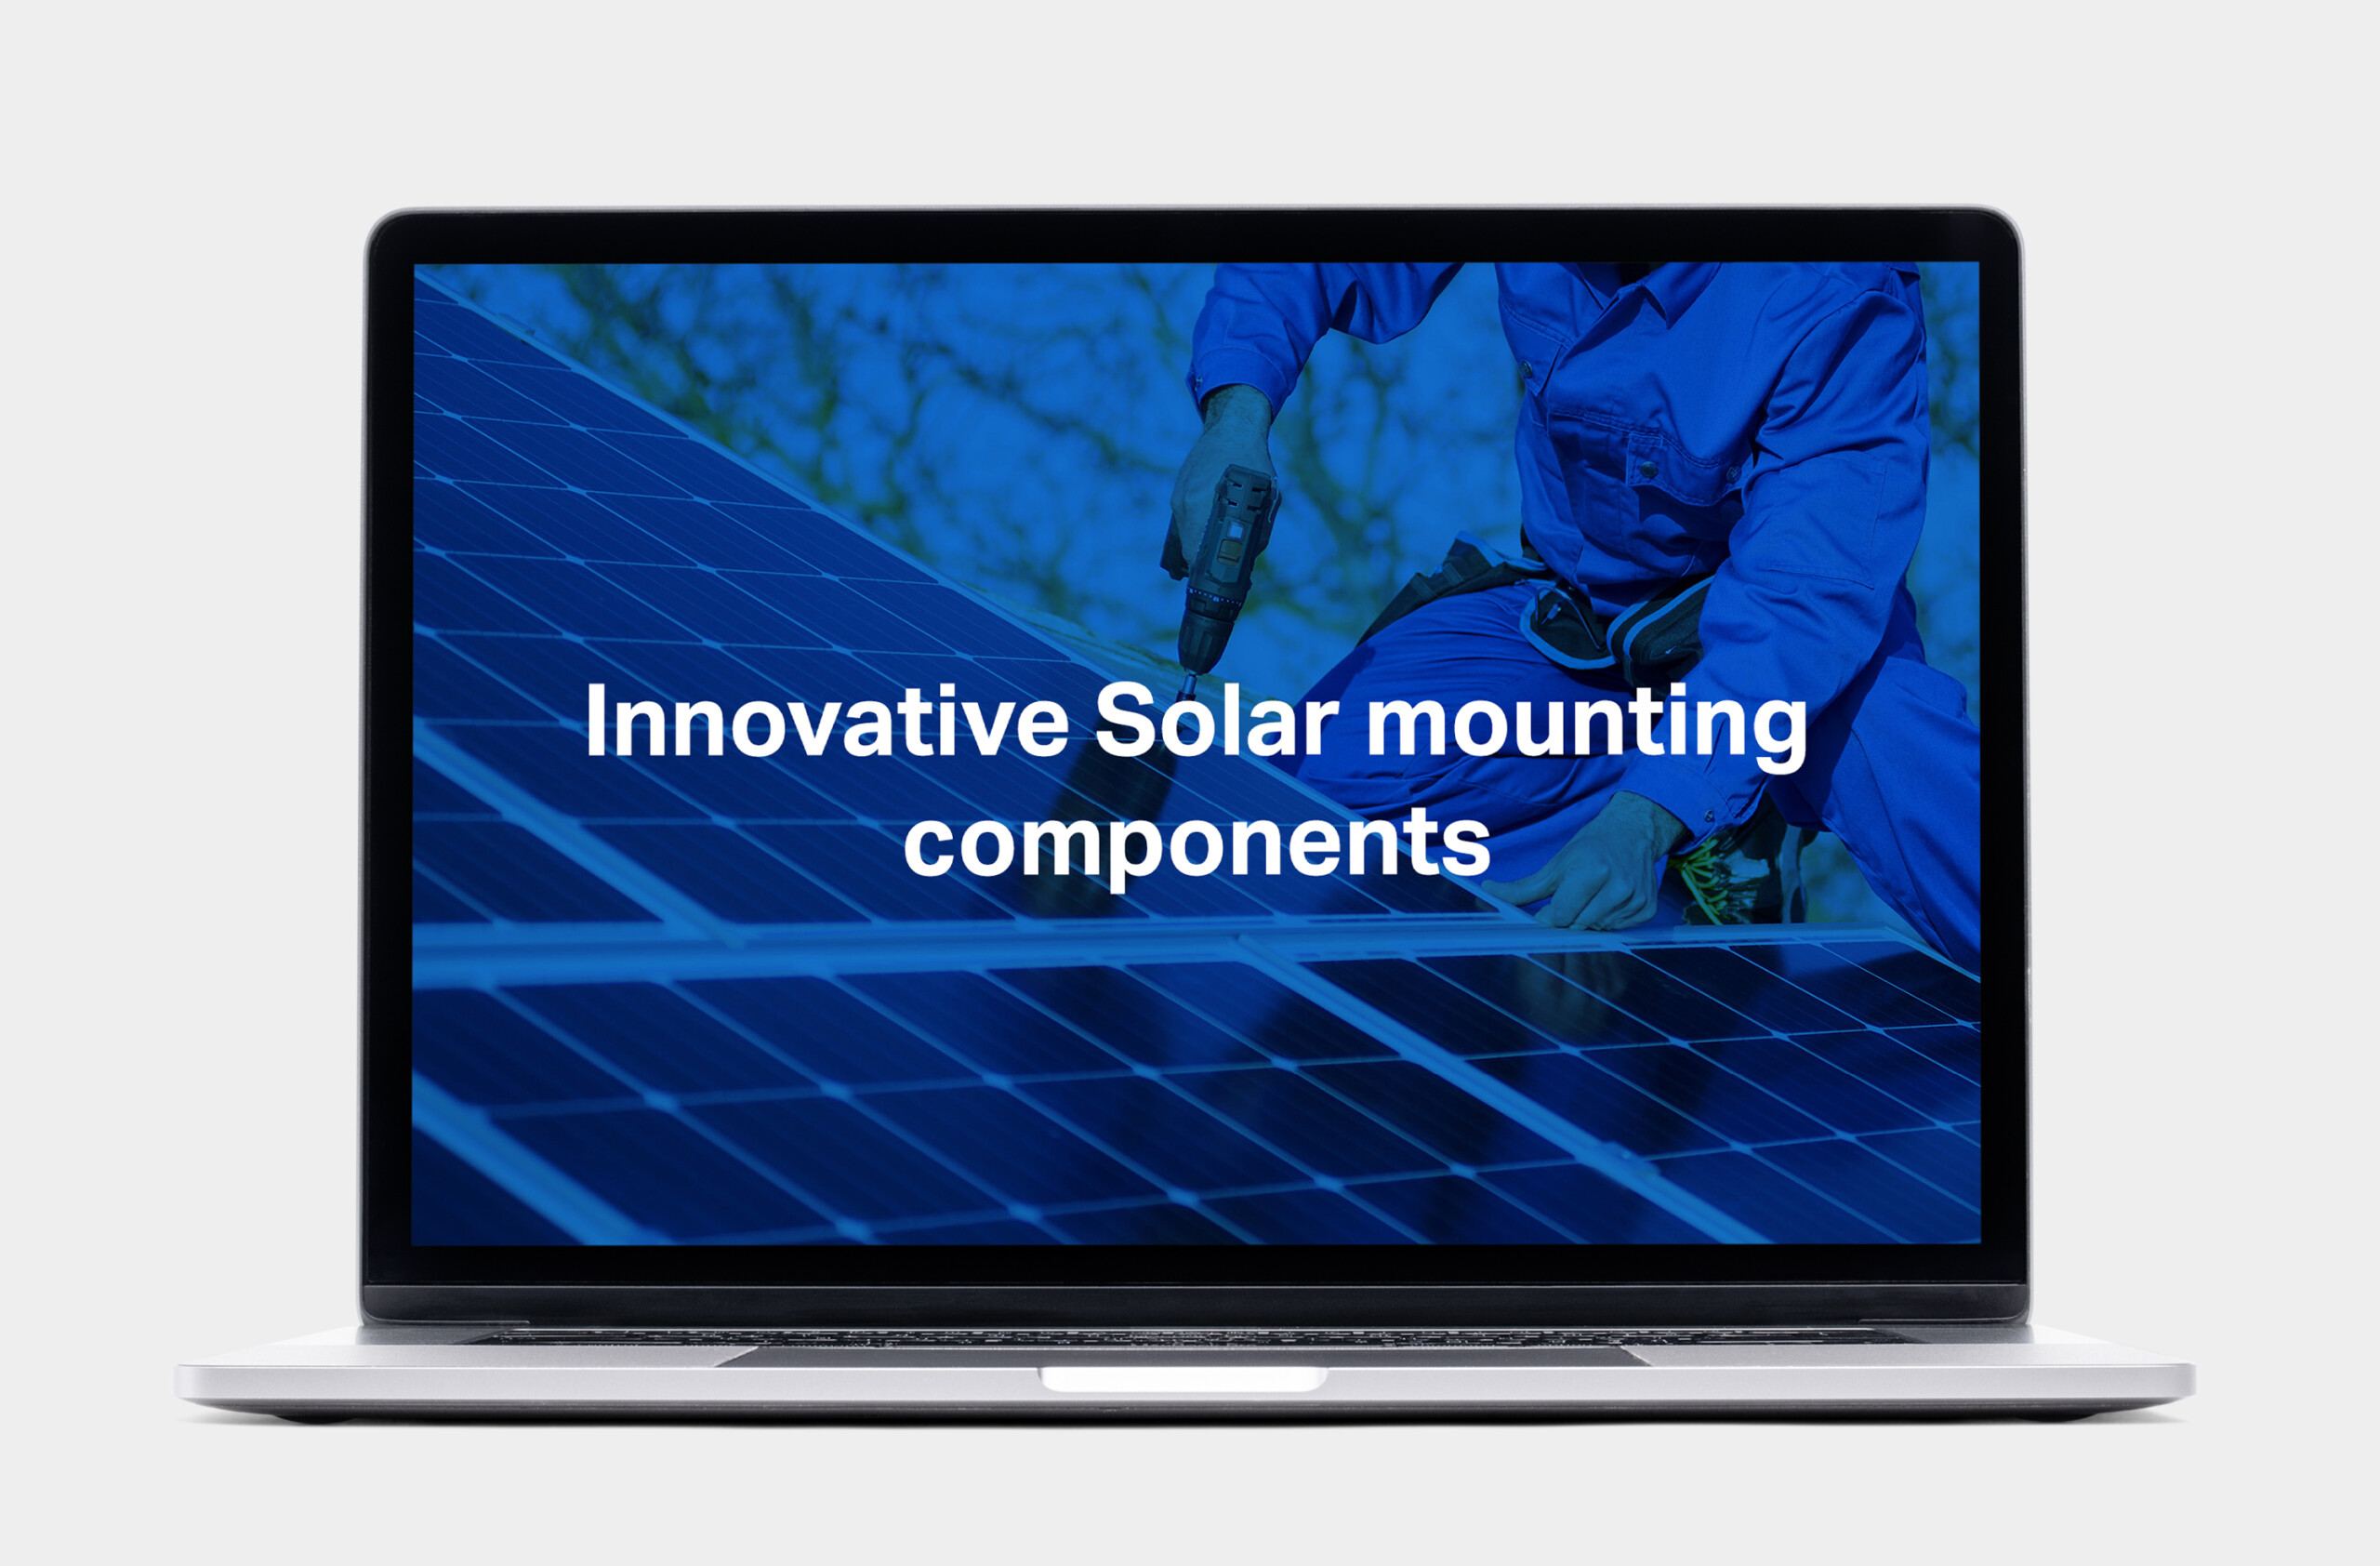 Innovative Solar mounting components